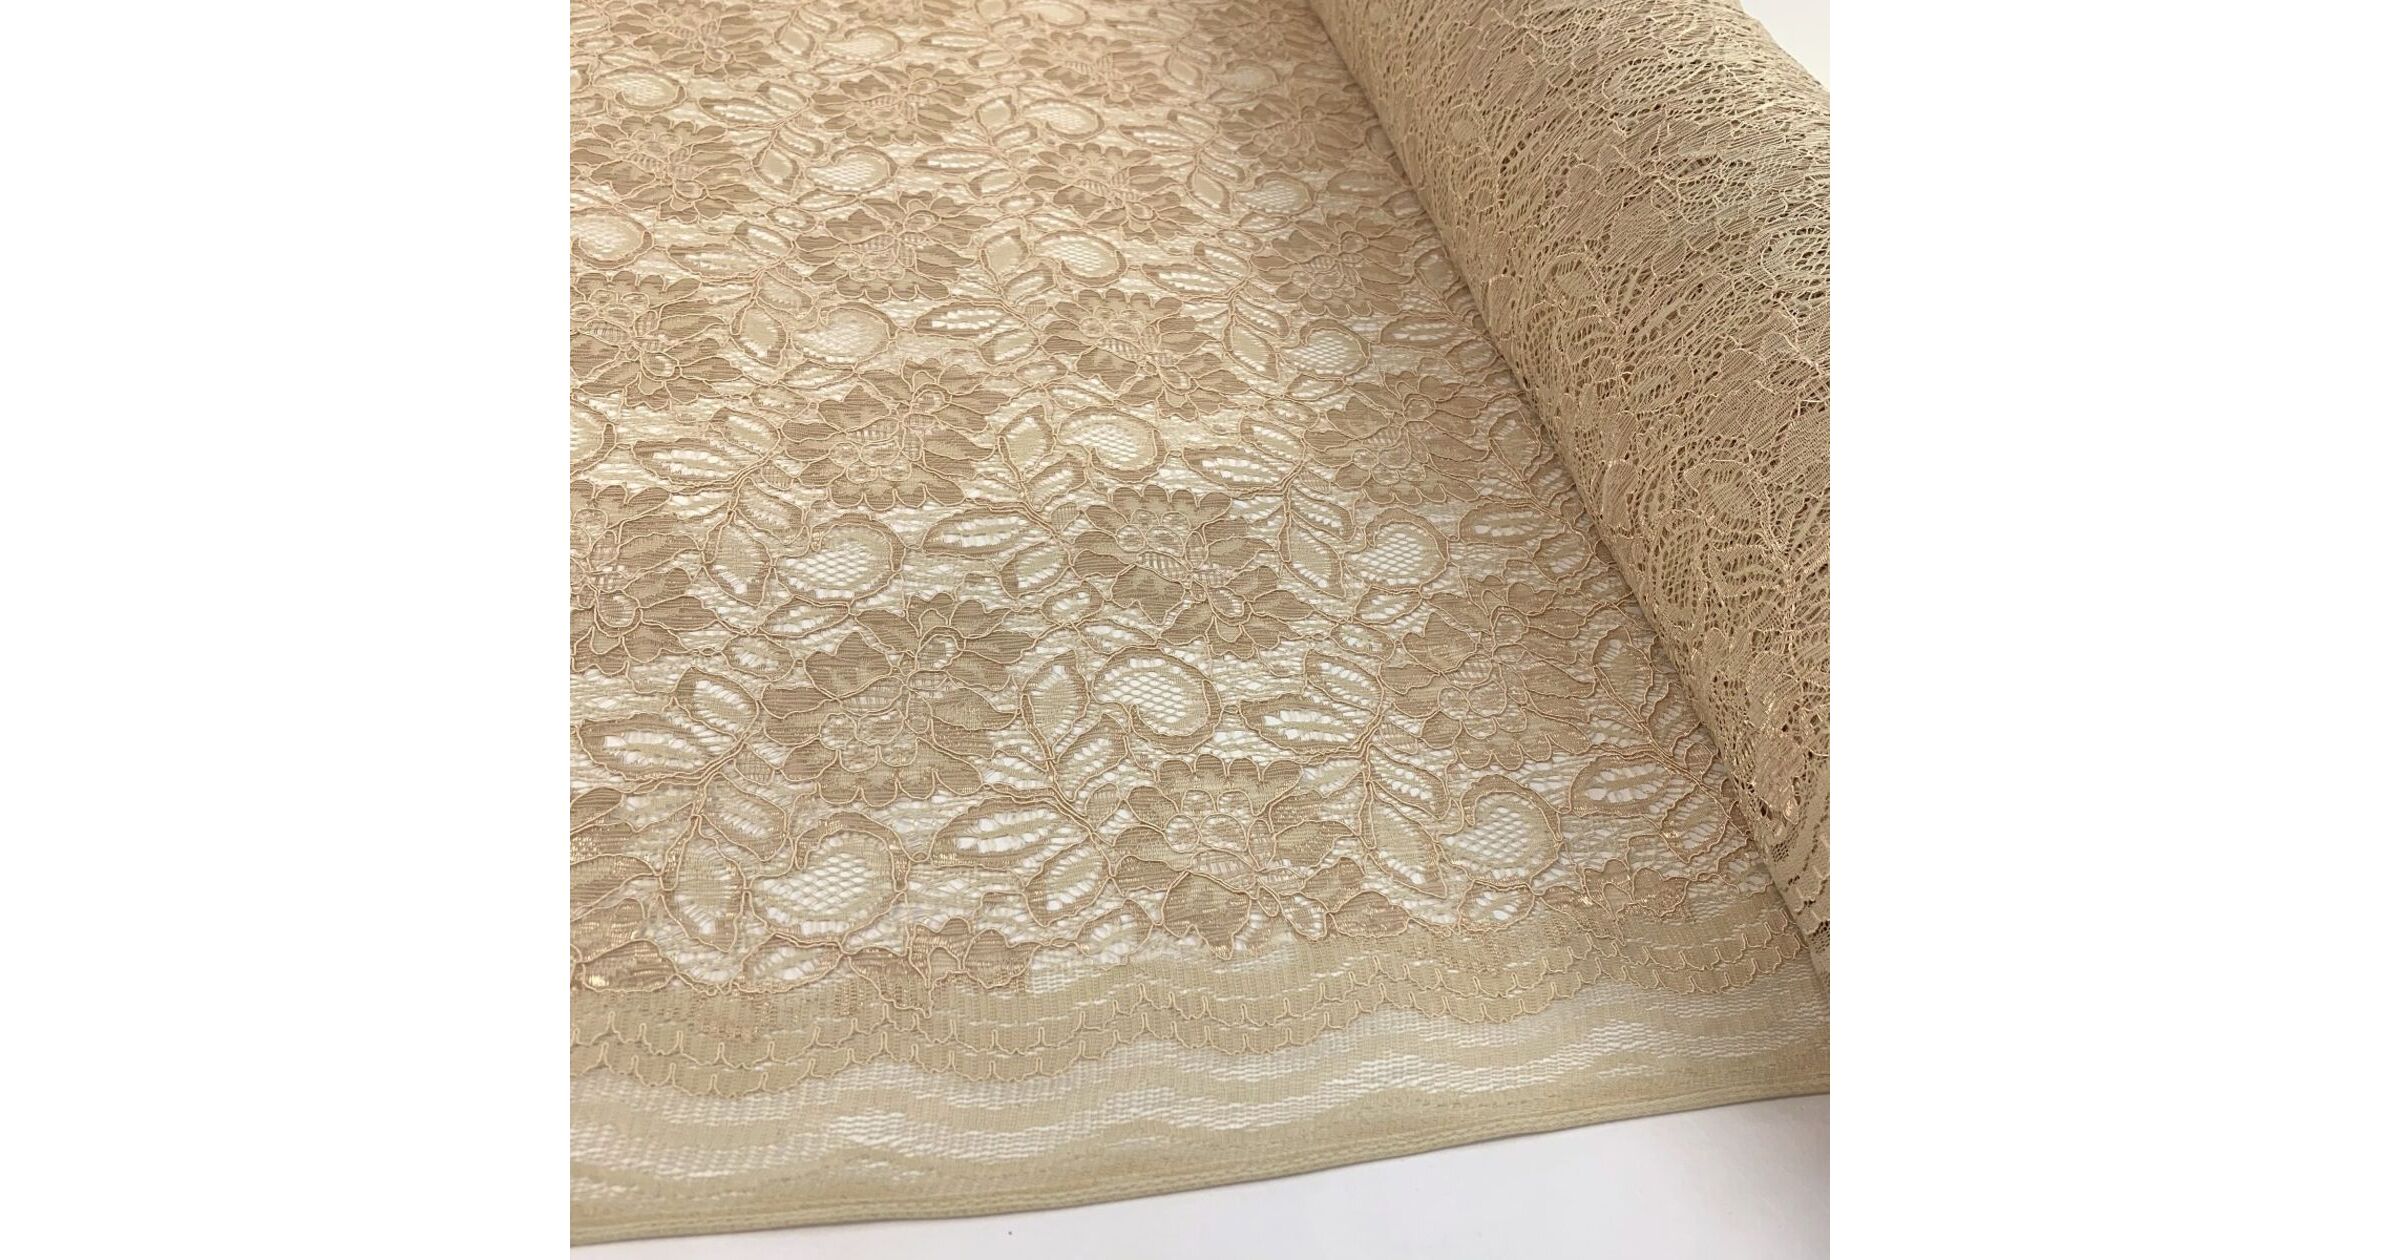 Tocca Corded Lace Bridal Fabric